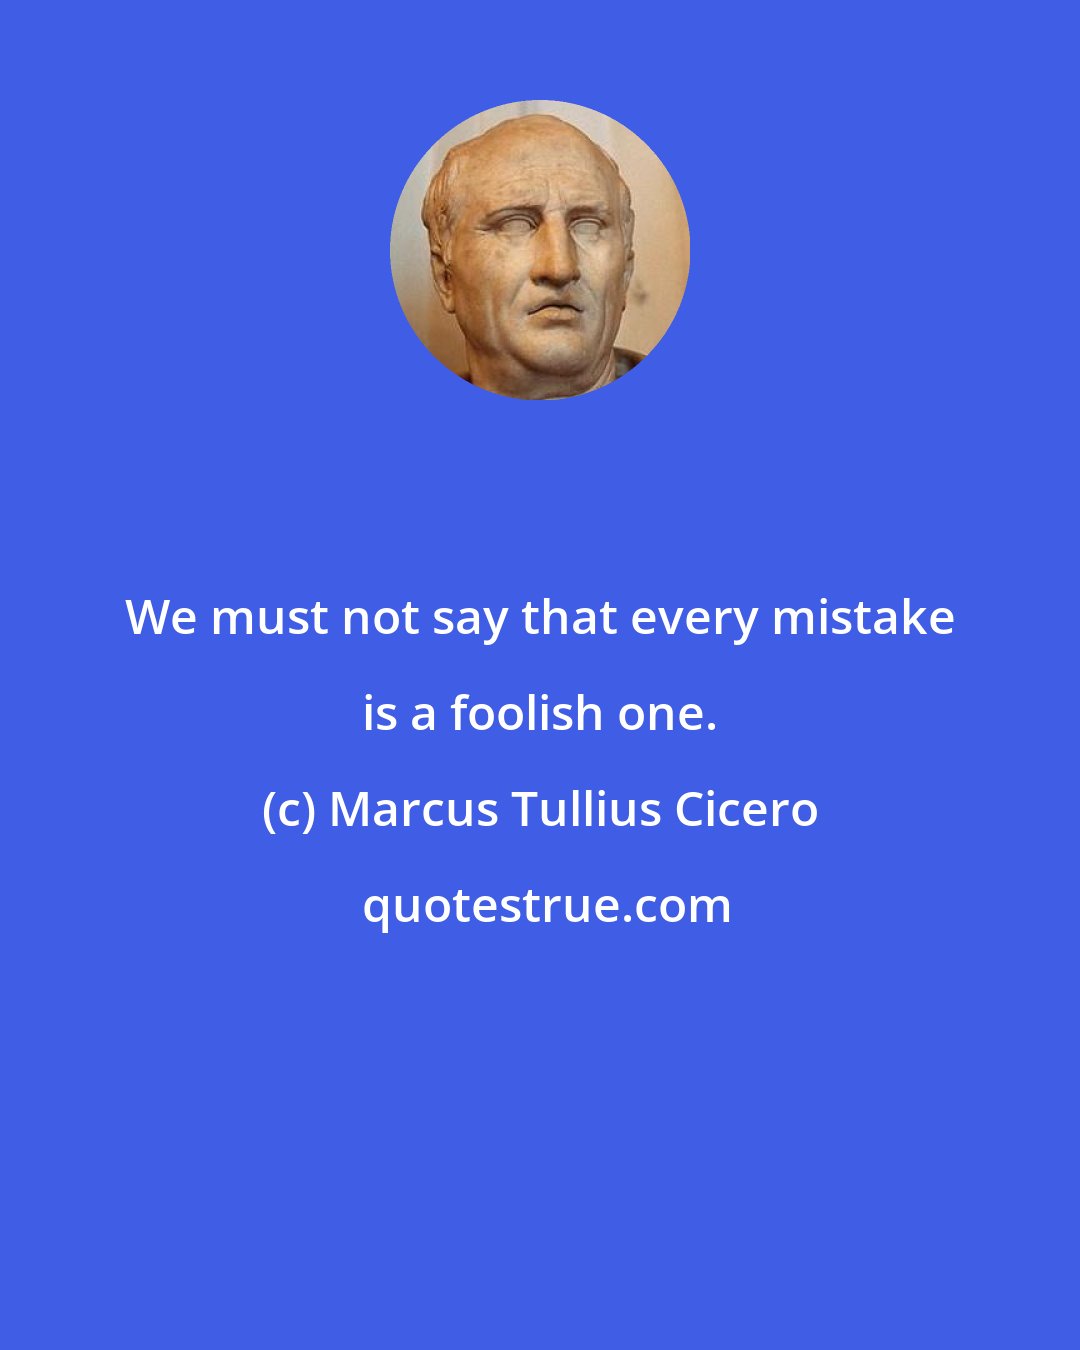 Marcus Tullius Cicero: We must not say that every mistake is a foolish one.